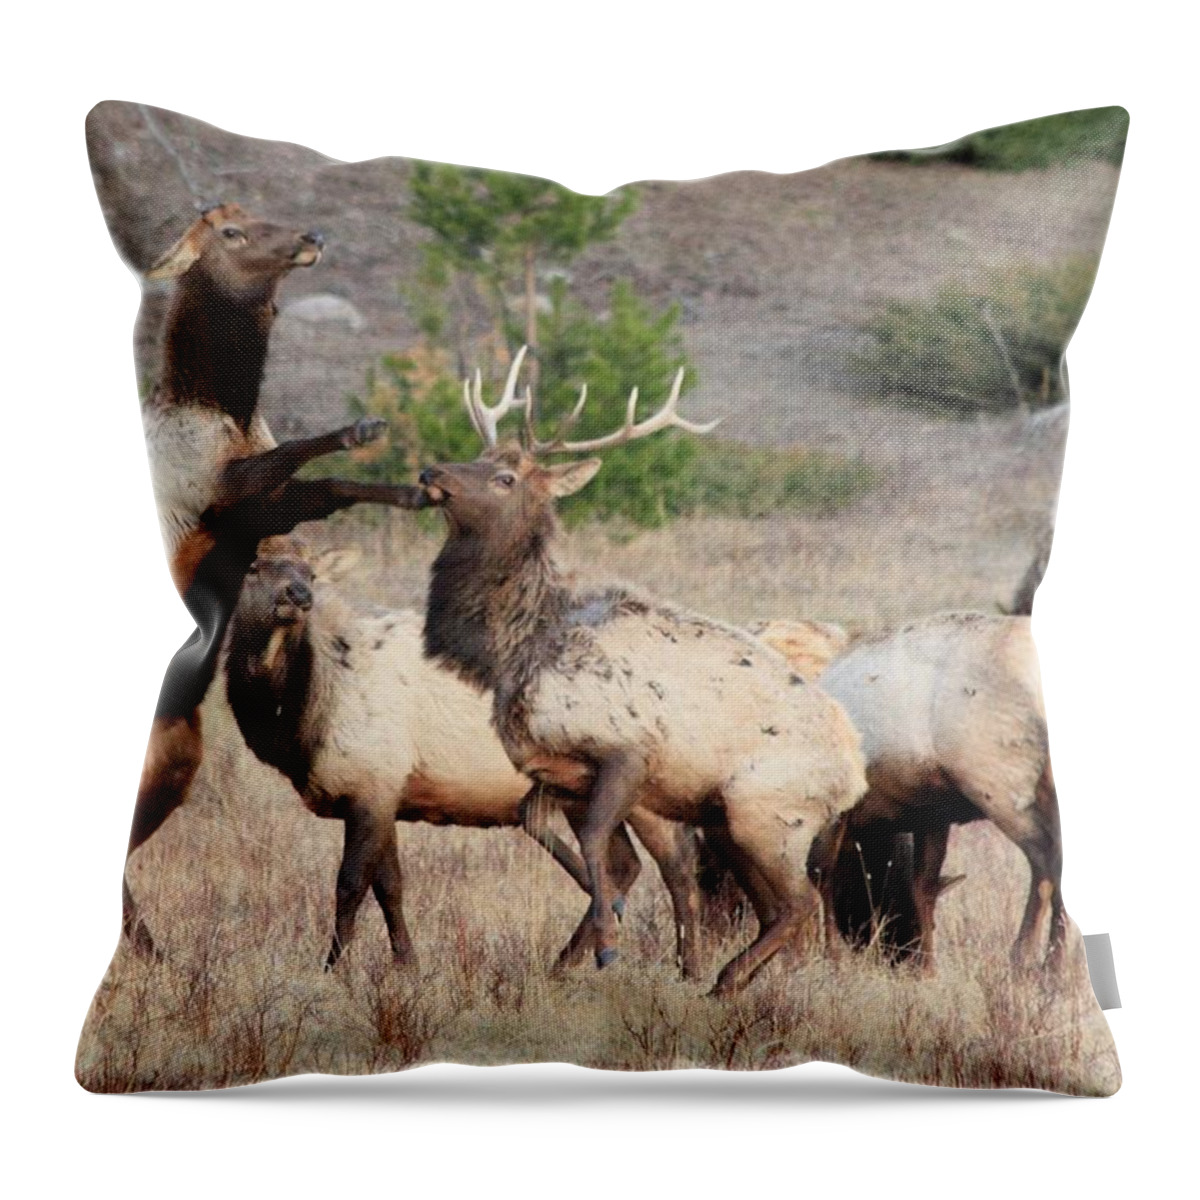 Elk Throw Pillow featuring the photograph Put Up Your Dukes by Shane Bechler